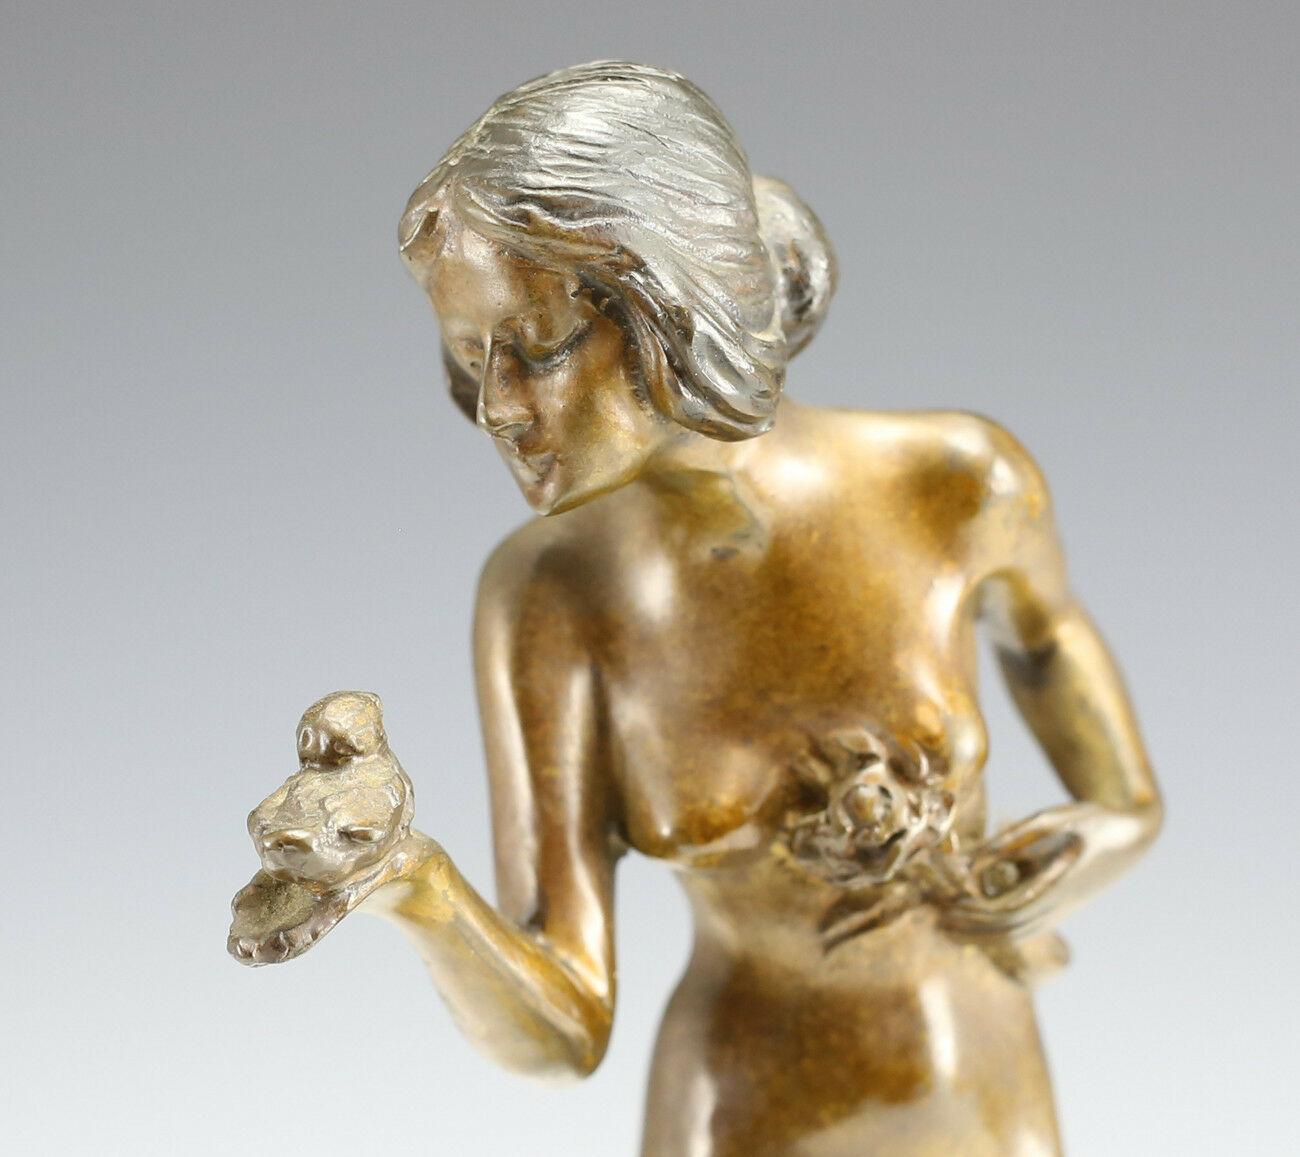 20th Century Fayral Art Deco Bronze “Nude Girl with Bird” Sculpture on Stone Base, Signed. For Sale